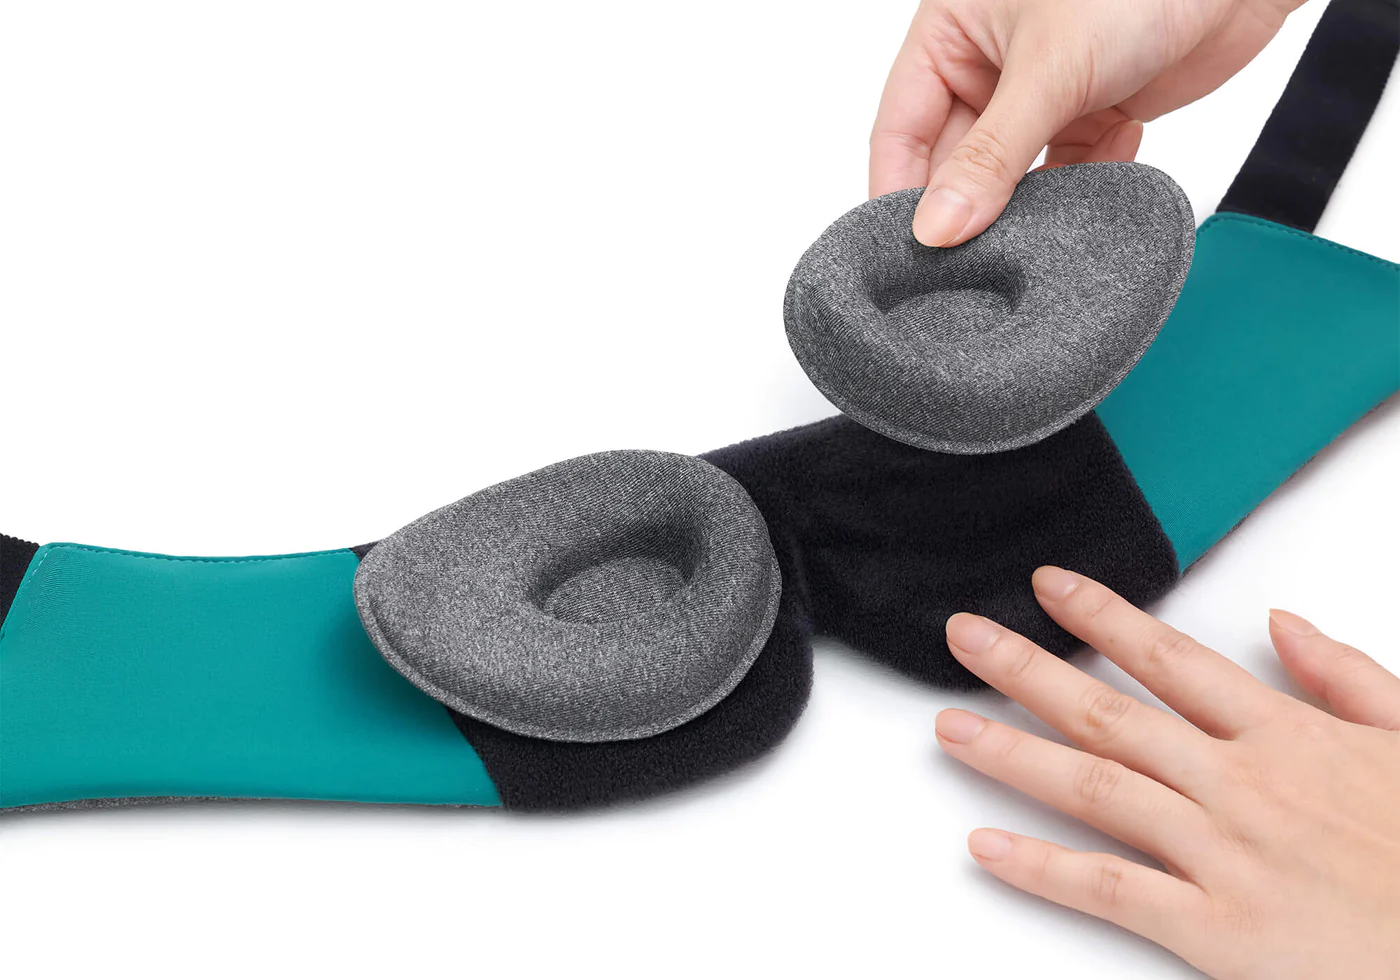 Hands positioning eye cups of a weighted sleep mask that provides deep pressure therapy.